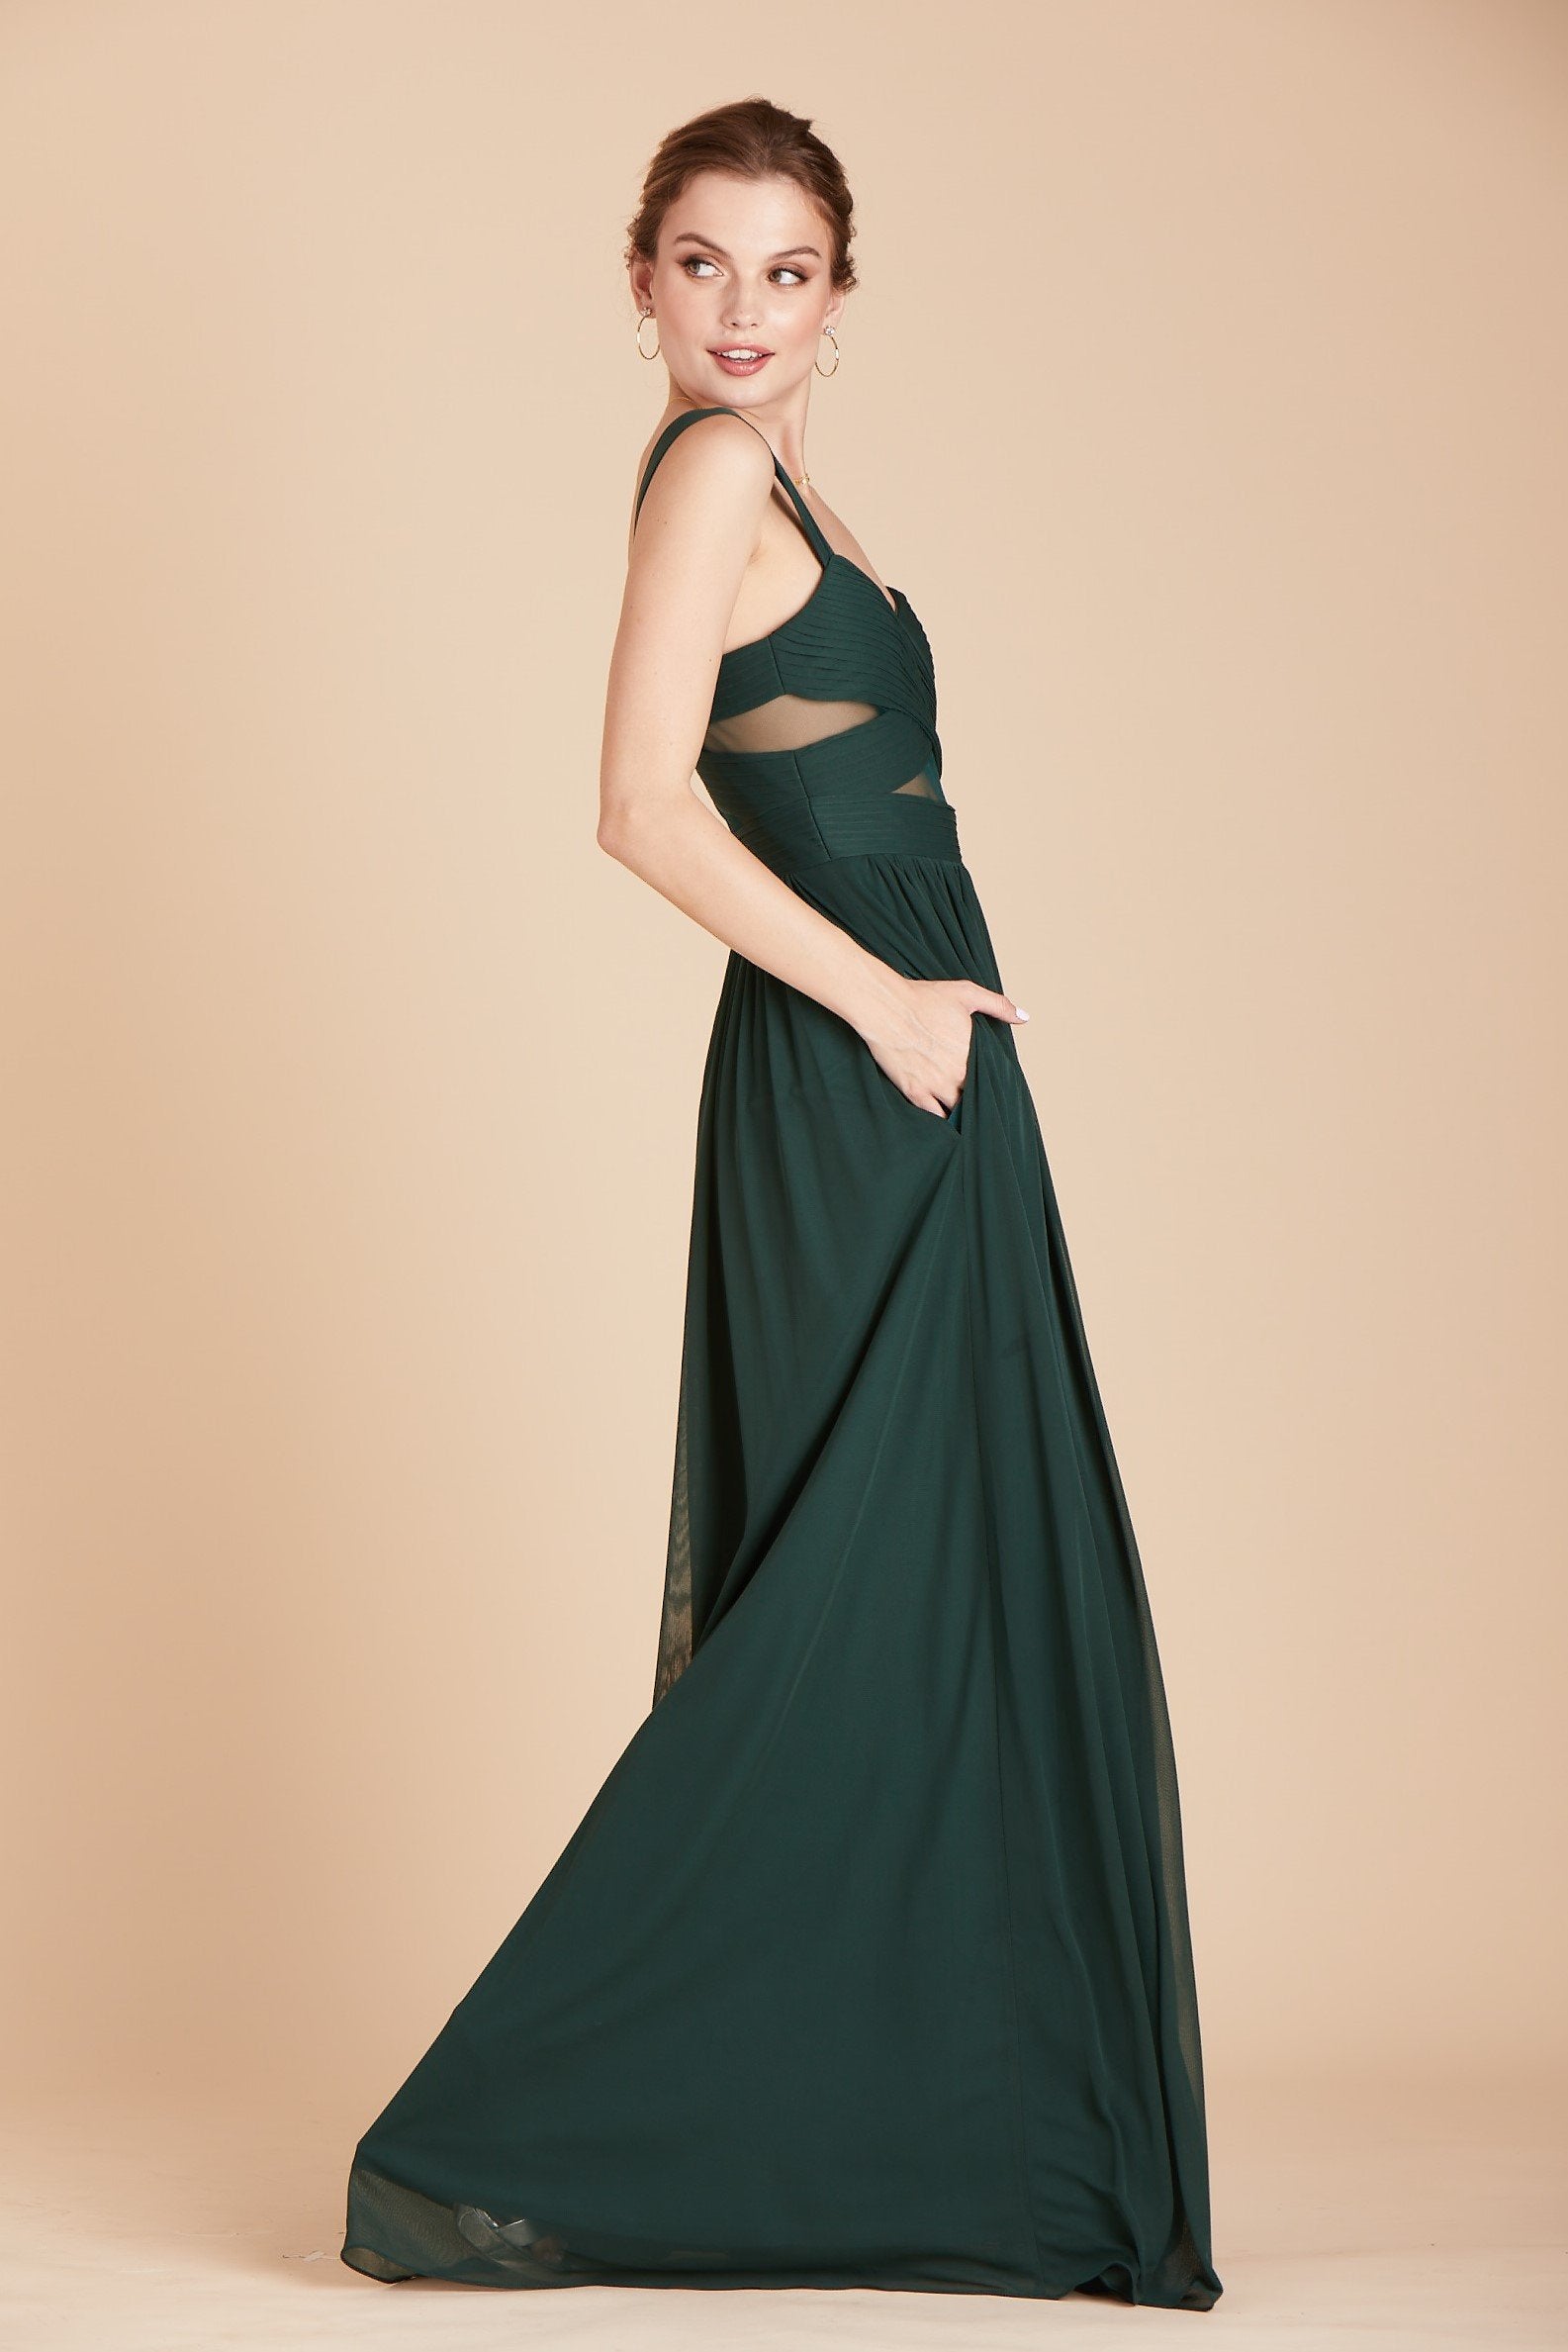 Elsye bridesmaid dress in emerald green chiffon by Birdy Grey, side view with hand in pocket